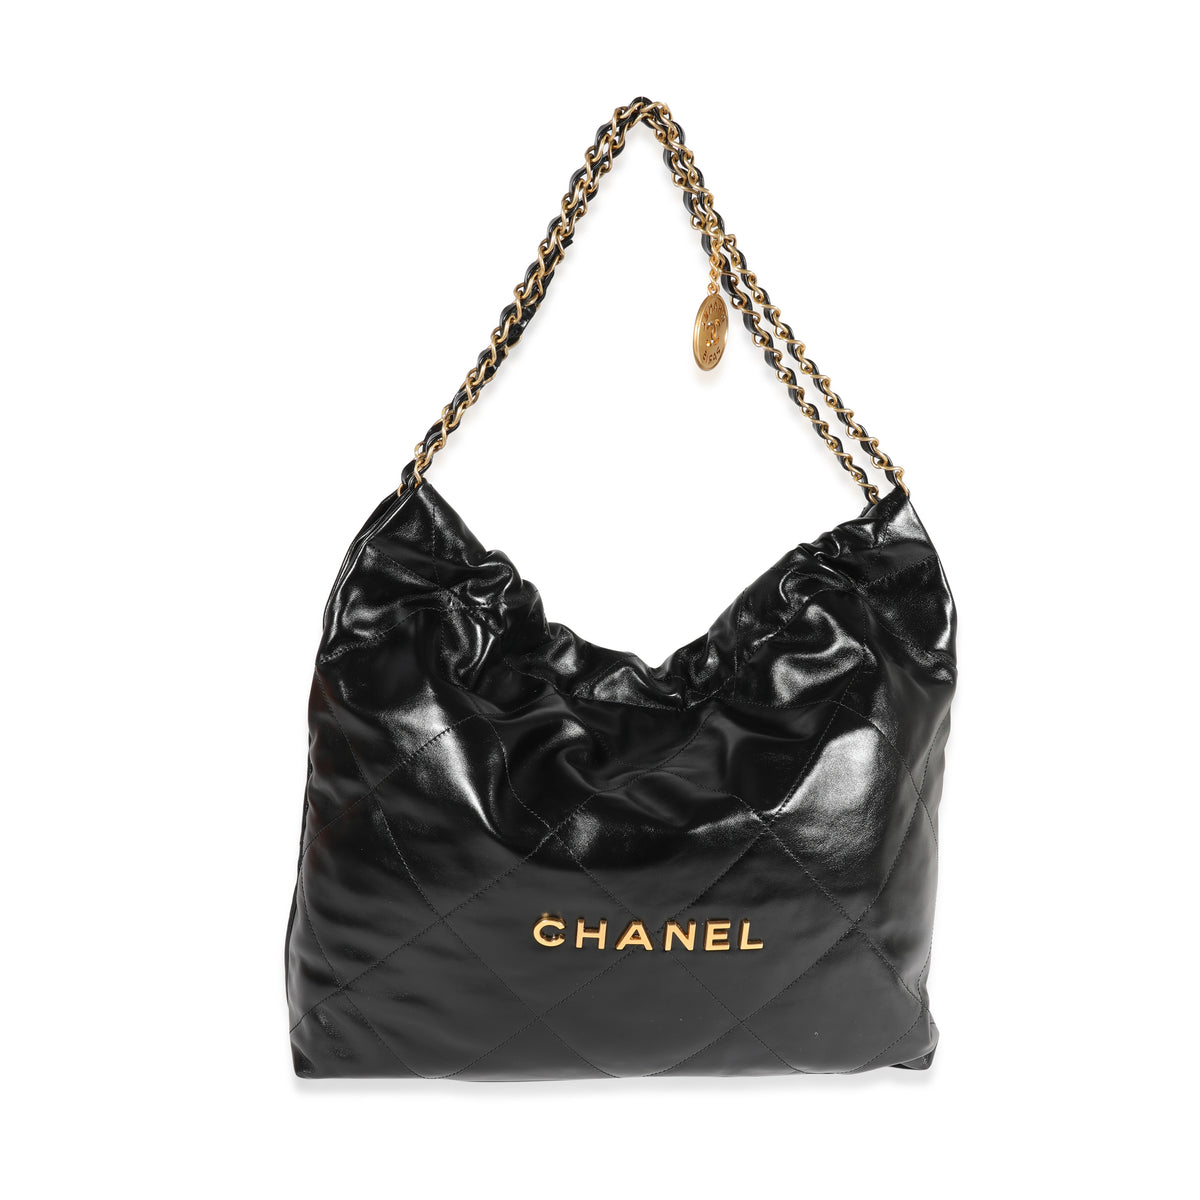 Chanel Black Quilted Shiny Calfskin Small Chanel 22 Bag, myGemma, FR